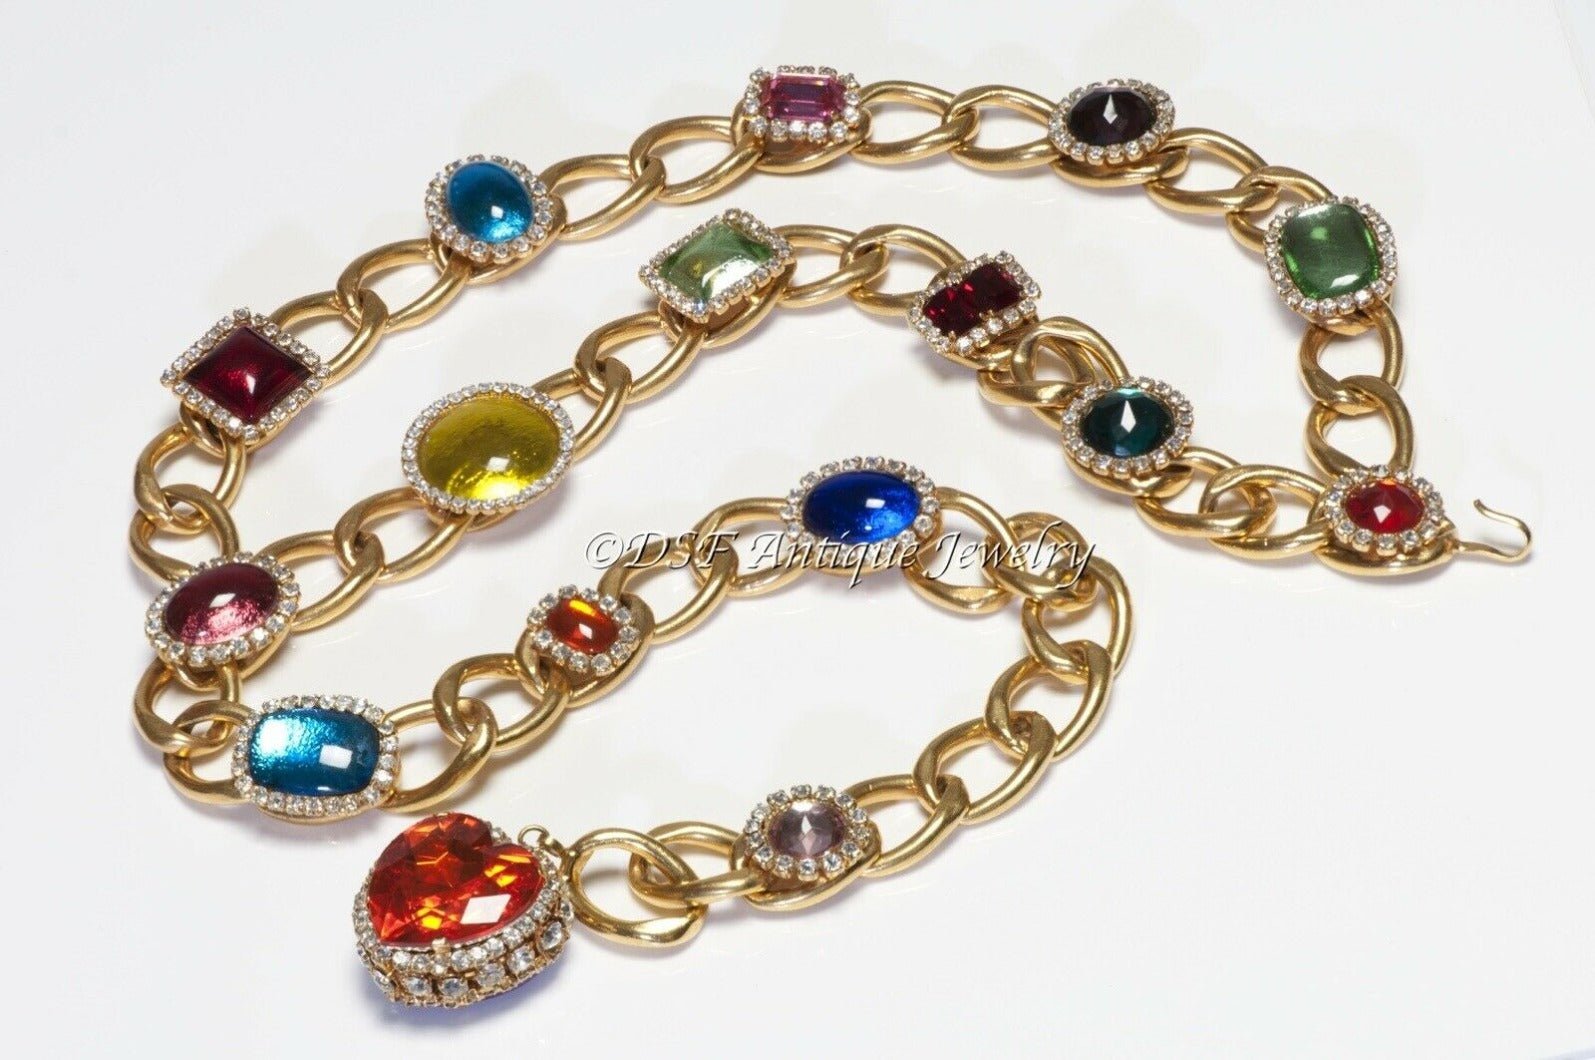 CHANEL Spring 1995 Multicolored Crystal Lucite Heart Chain Belt - DSF Antique Jewelry